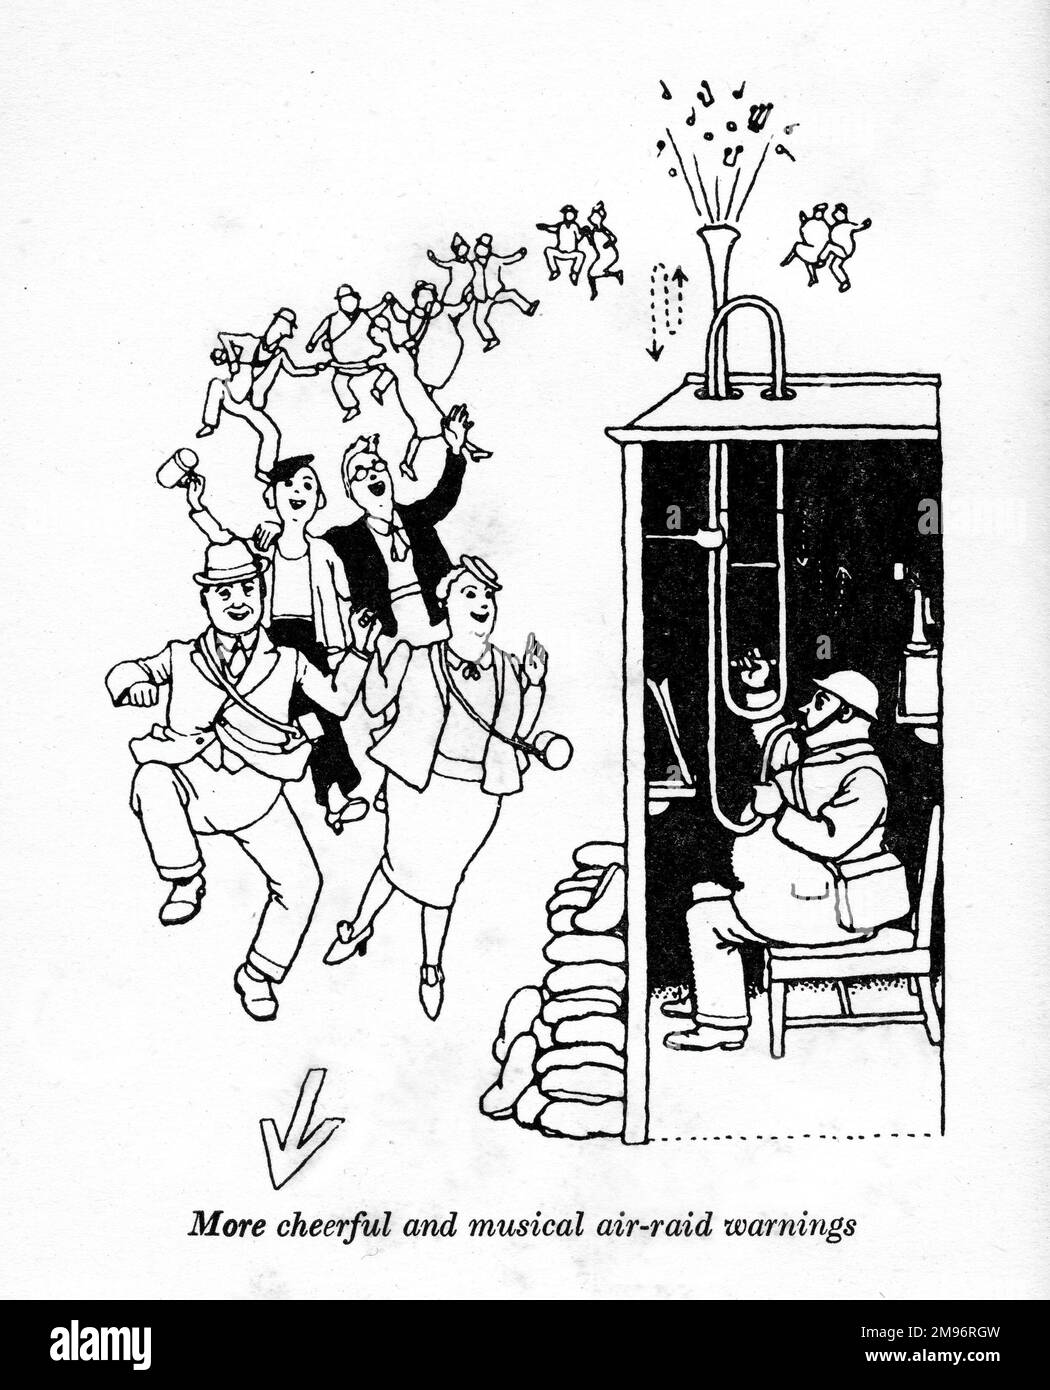 Heath Robinson - Wartime Cartoons - WWII.  More cheerful and musical air raid warnings, which encourage people to dance. Stock Photo